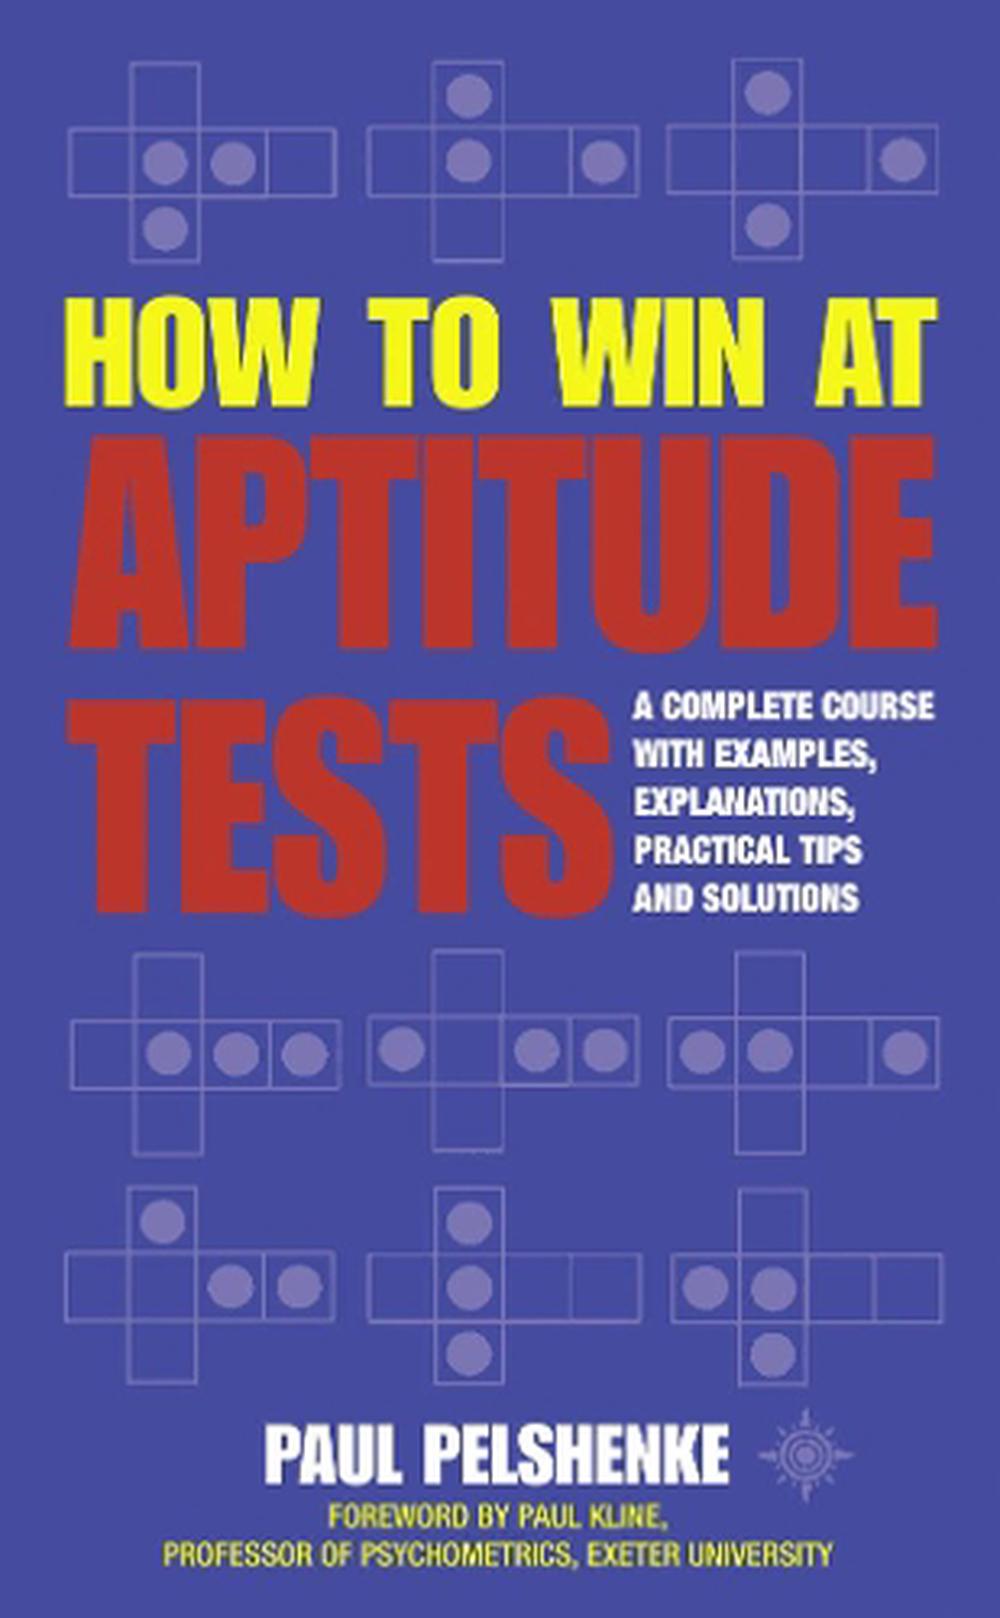 how-to-win-at-aptitude-tests-by-paul-pelshenke-english-paperback-book-free-shi-9780722528143